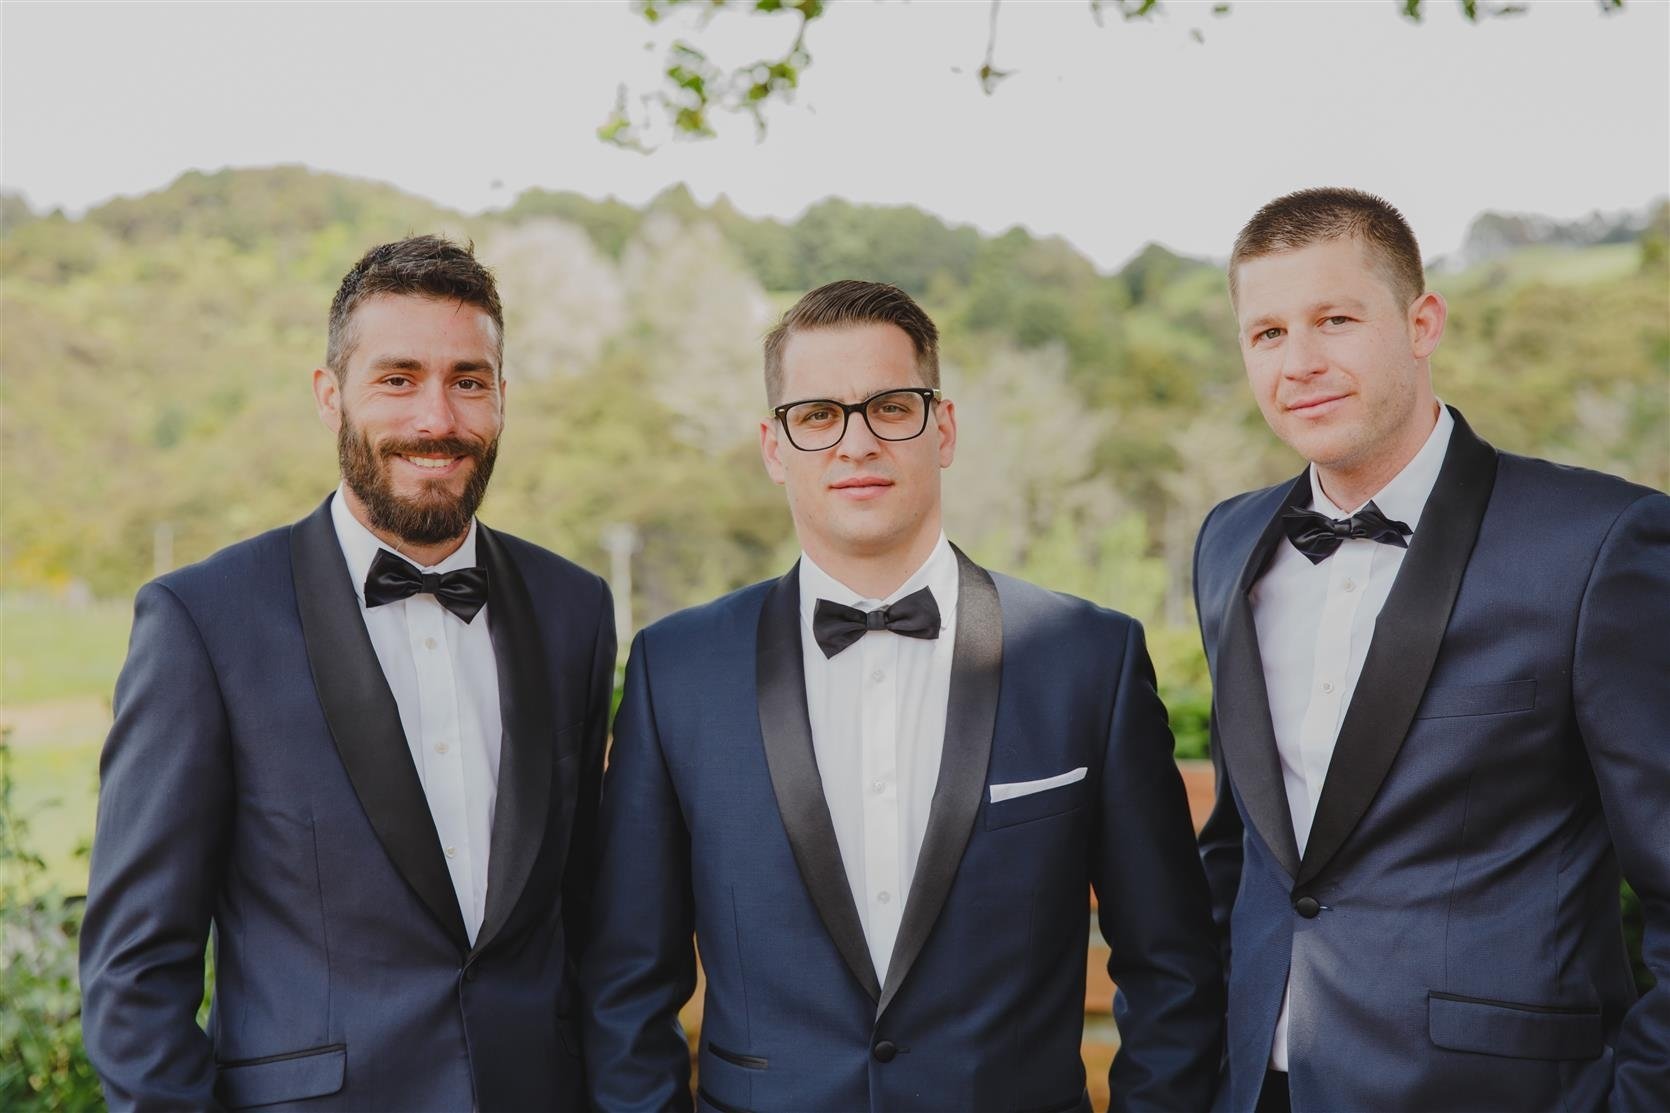 10 Fashionable Groom And Groomsmen Attire Ideas 5 gorgeous looks for spring grooms chic vintage brides 2022